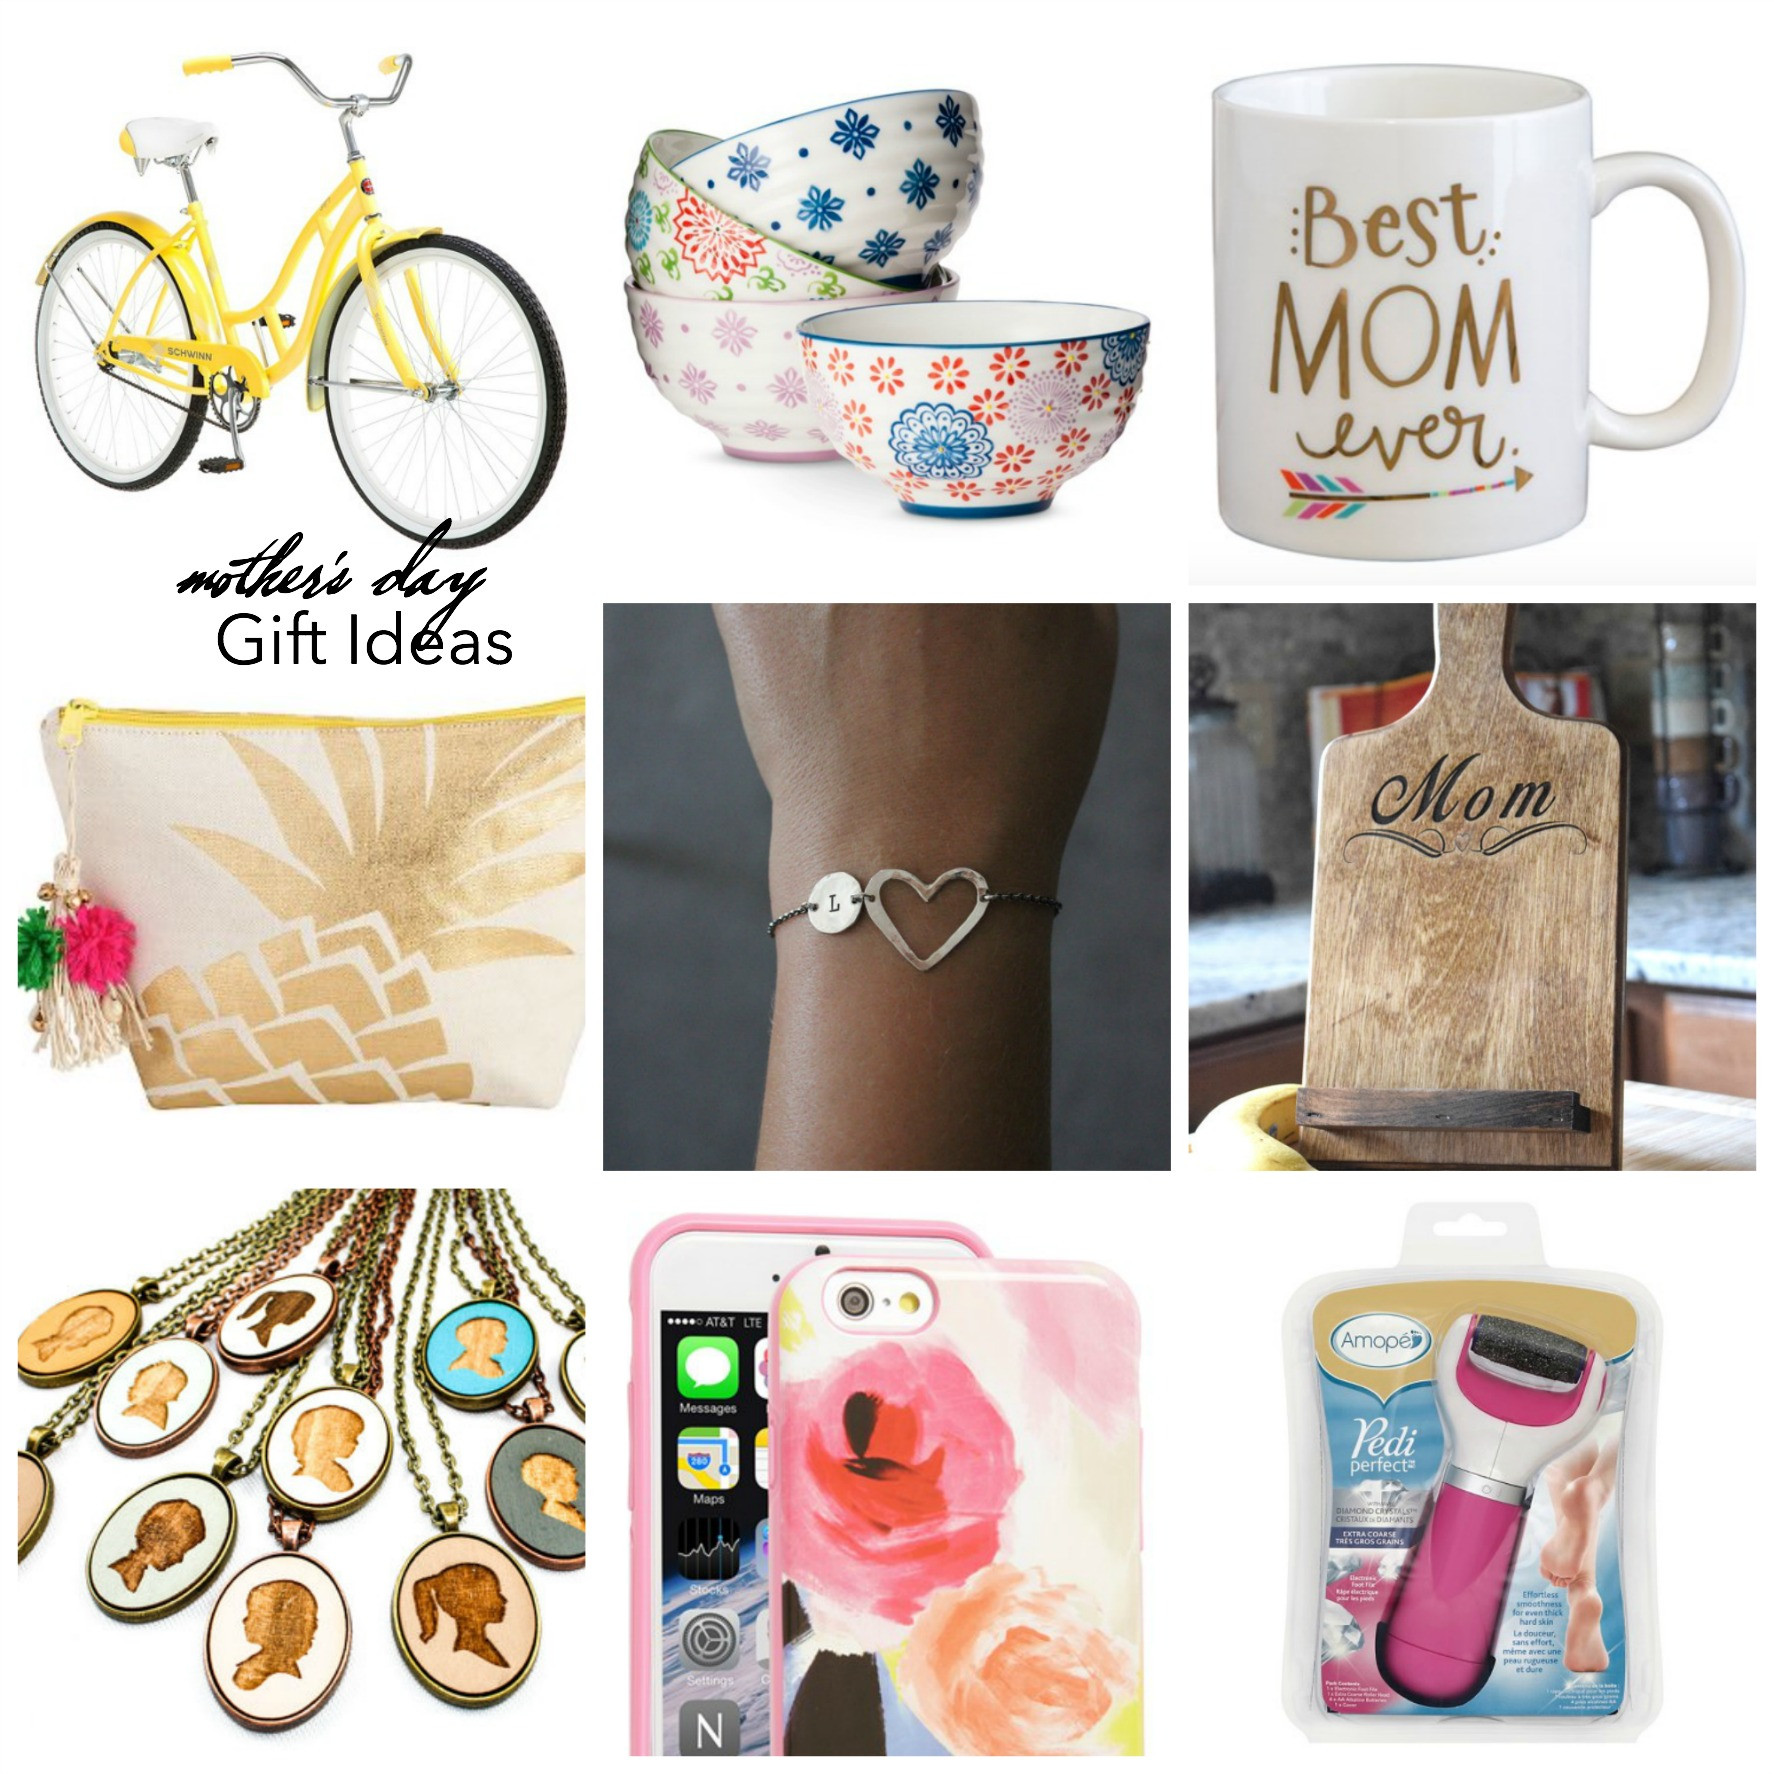 Good Mothers Day Gift Ideas
 43 DIY Mothers Day Gifts Handmade Gift Ideas For Mom